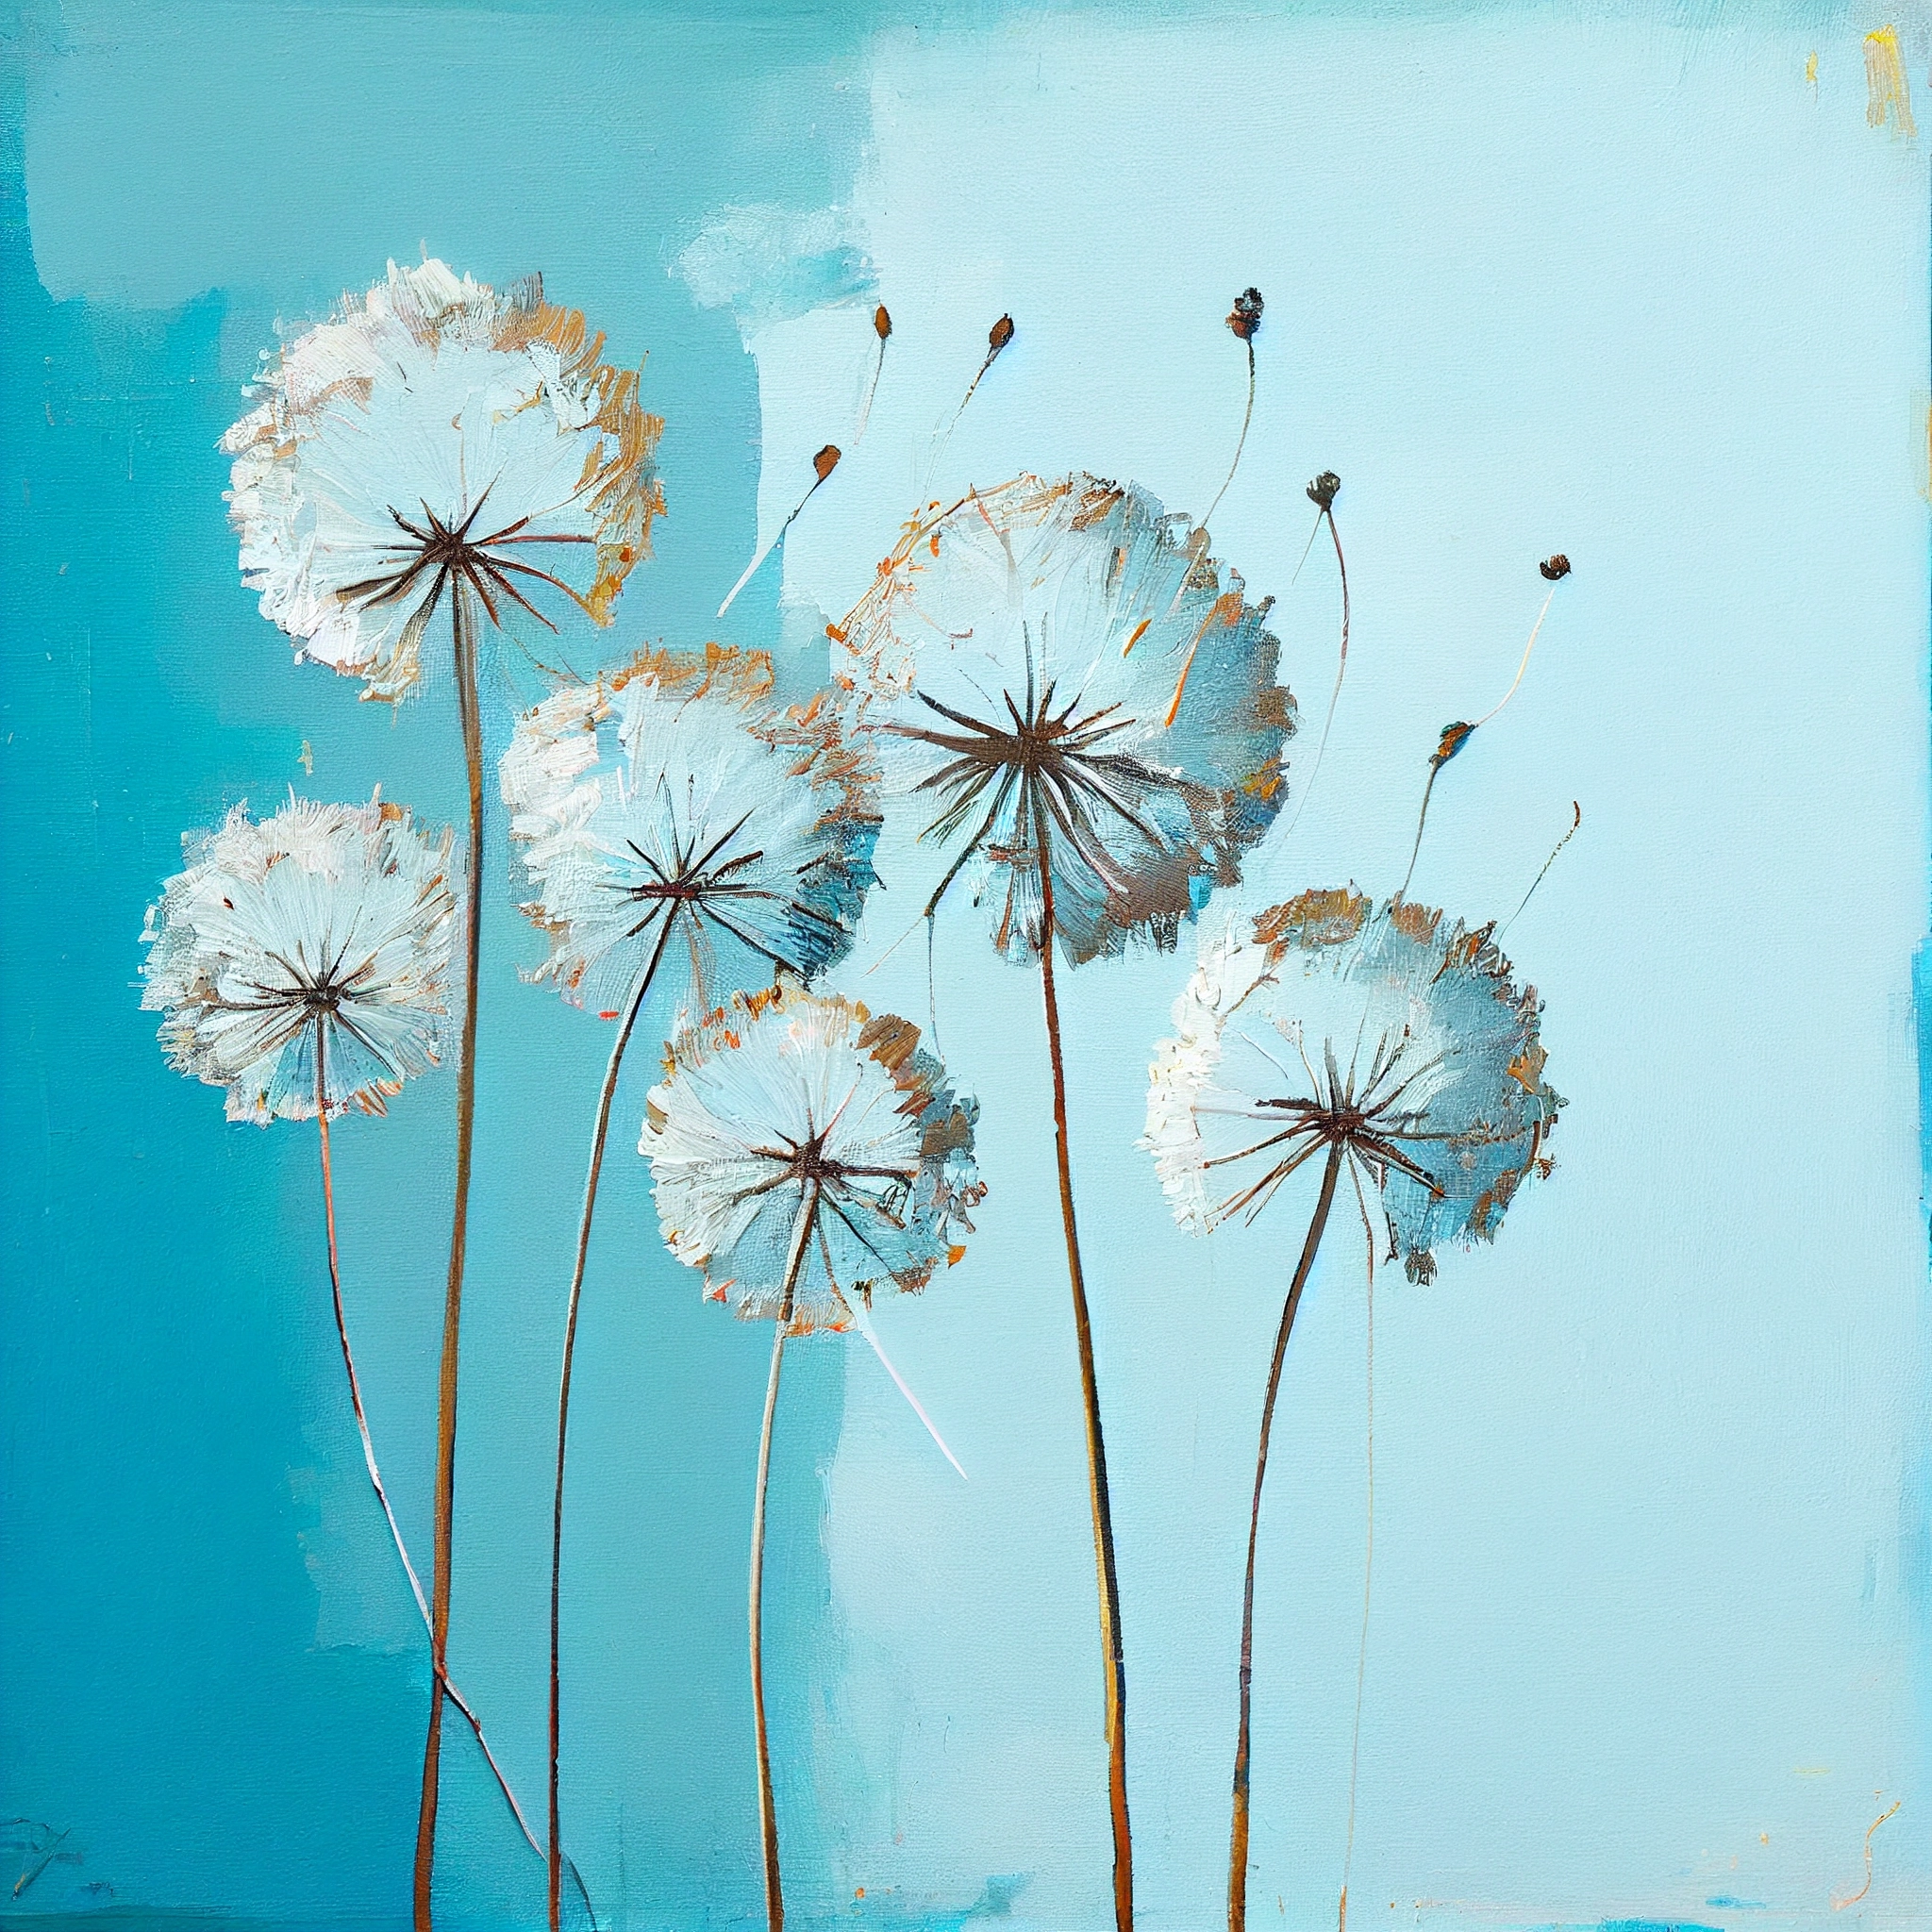 "Blue Dreams: A Stunning Abstract Print of Dandelions"